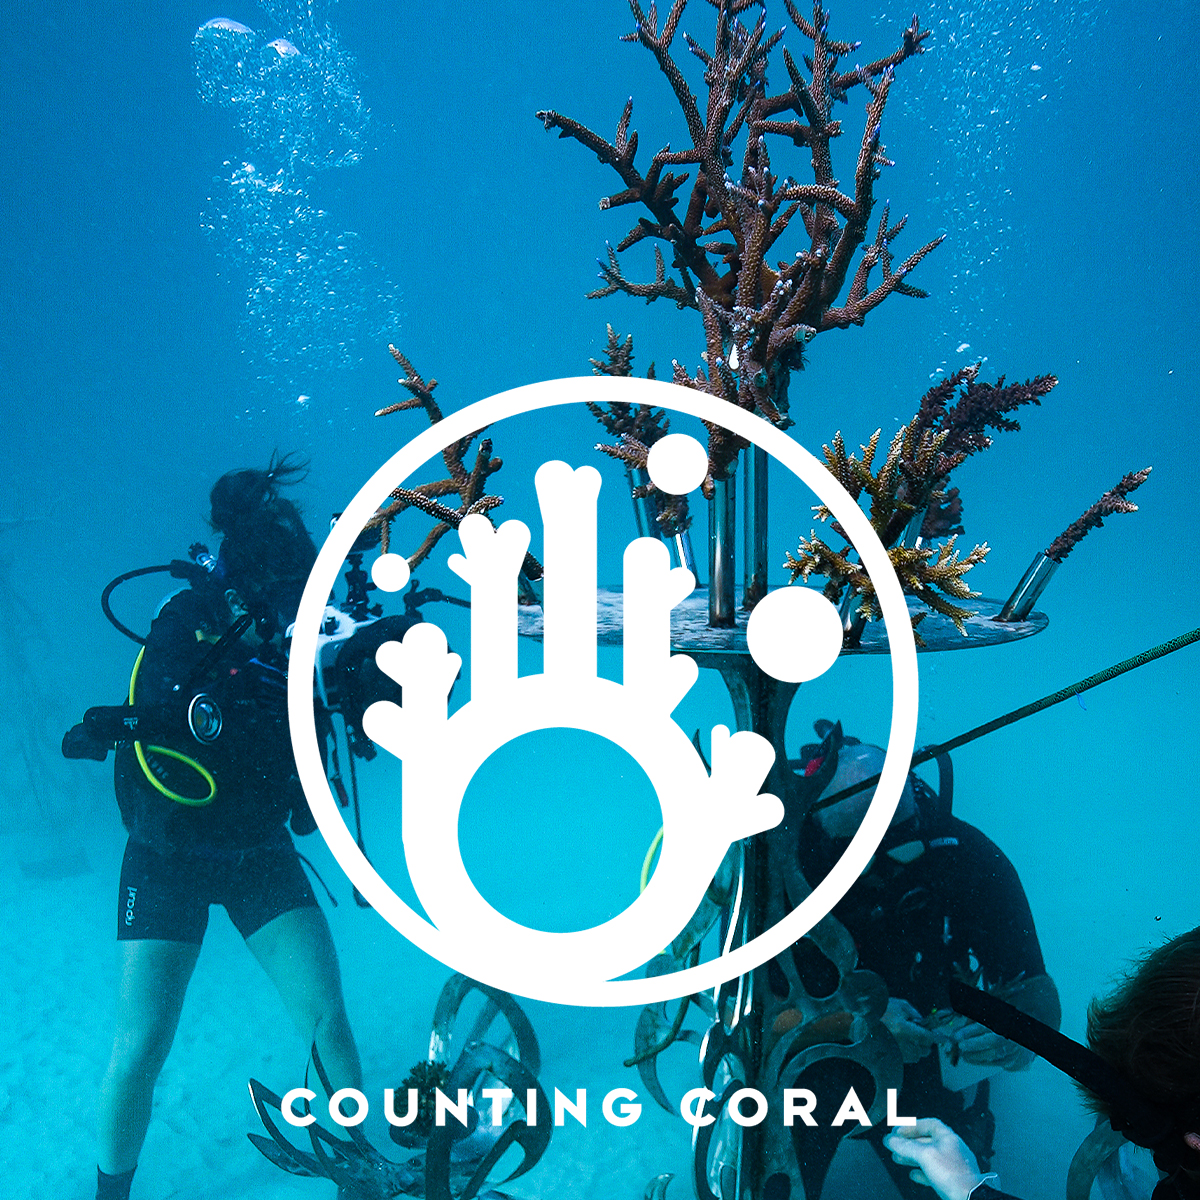 Under water photo of divers and coral with the Counting Coral logo and text overlaid atop.